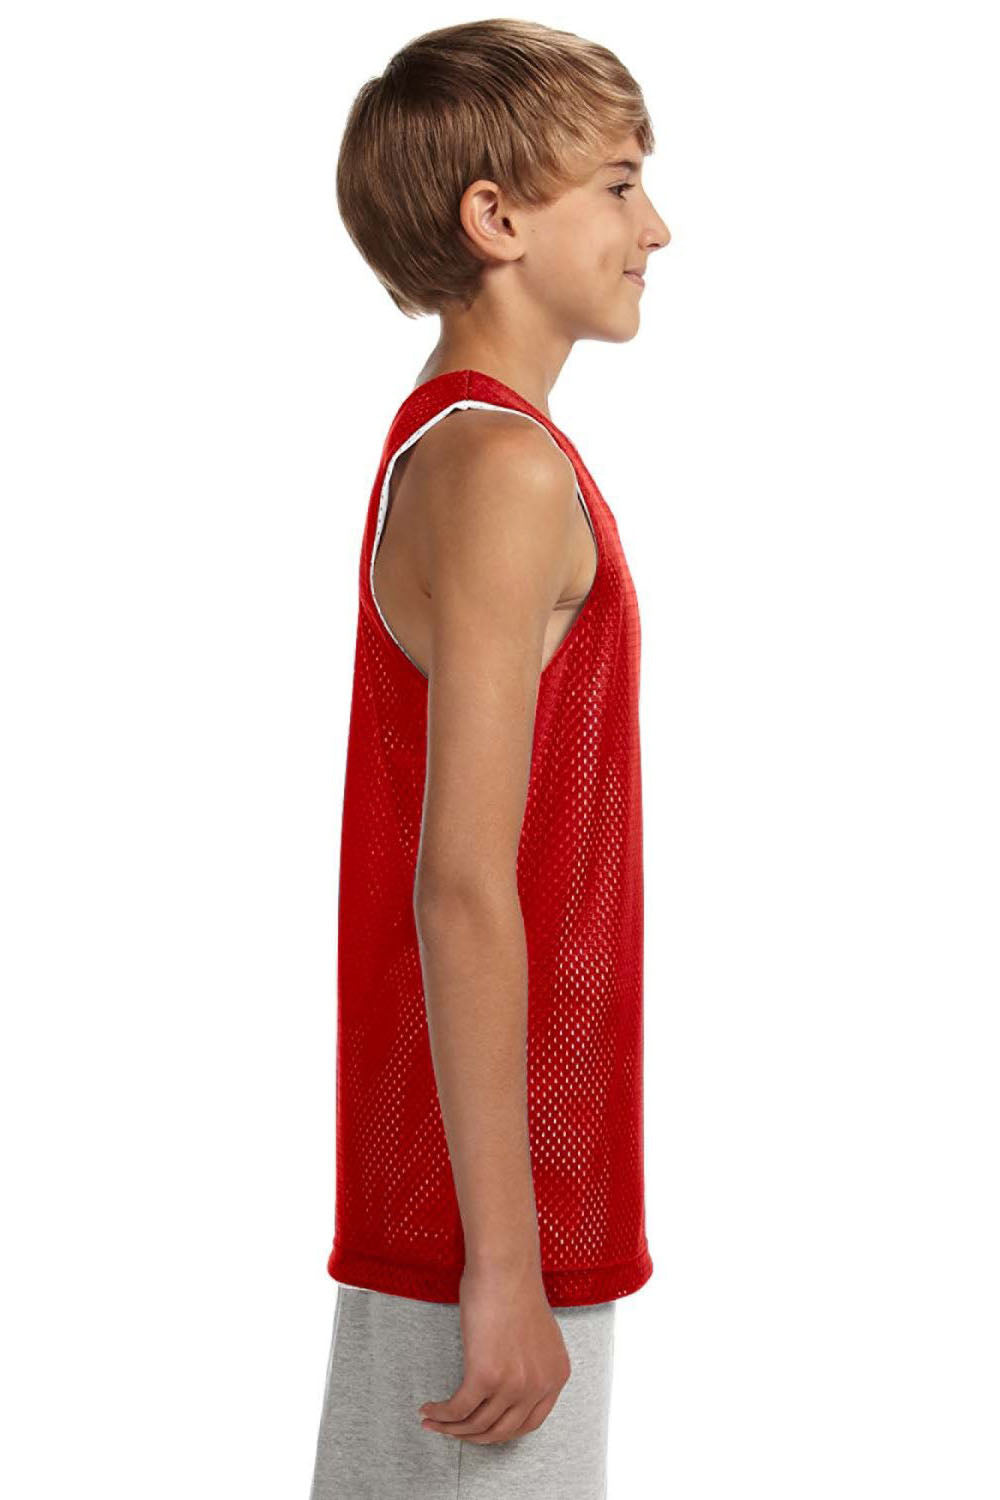 A4 N2206 Youth Reversible Moisture Wicking Mesh Tank Top Scarlet Red/White Model Side